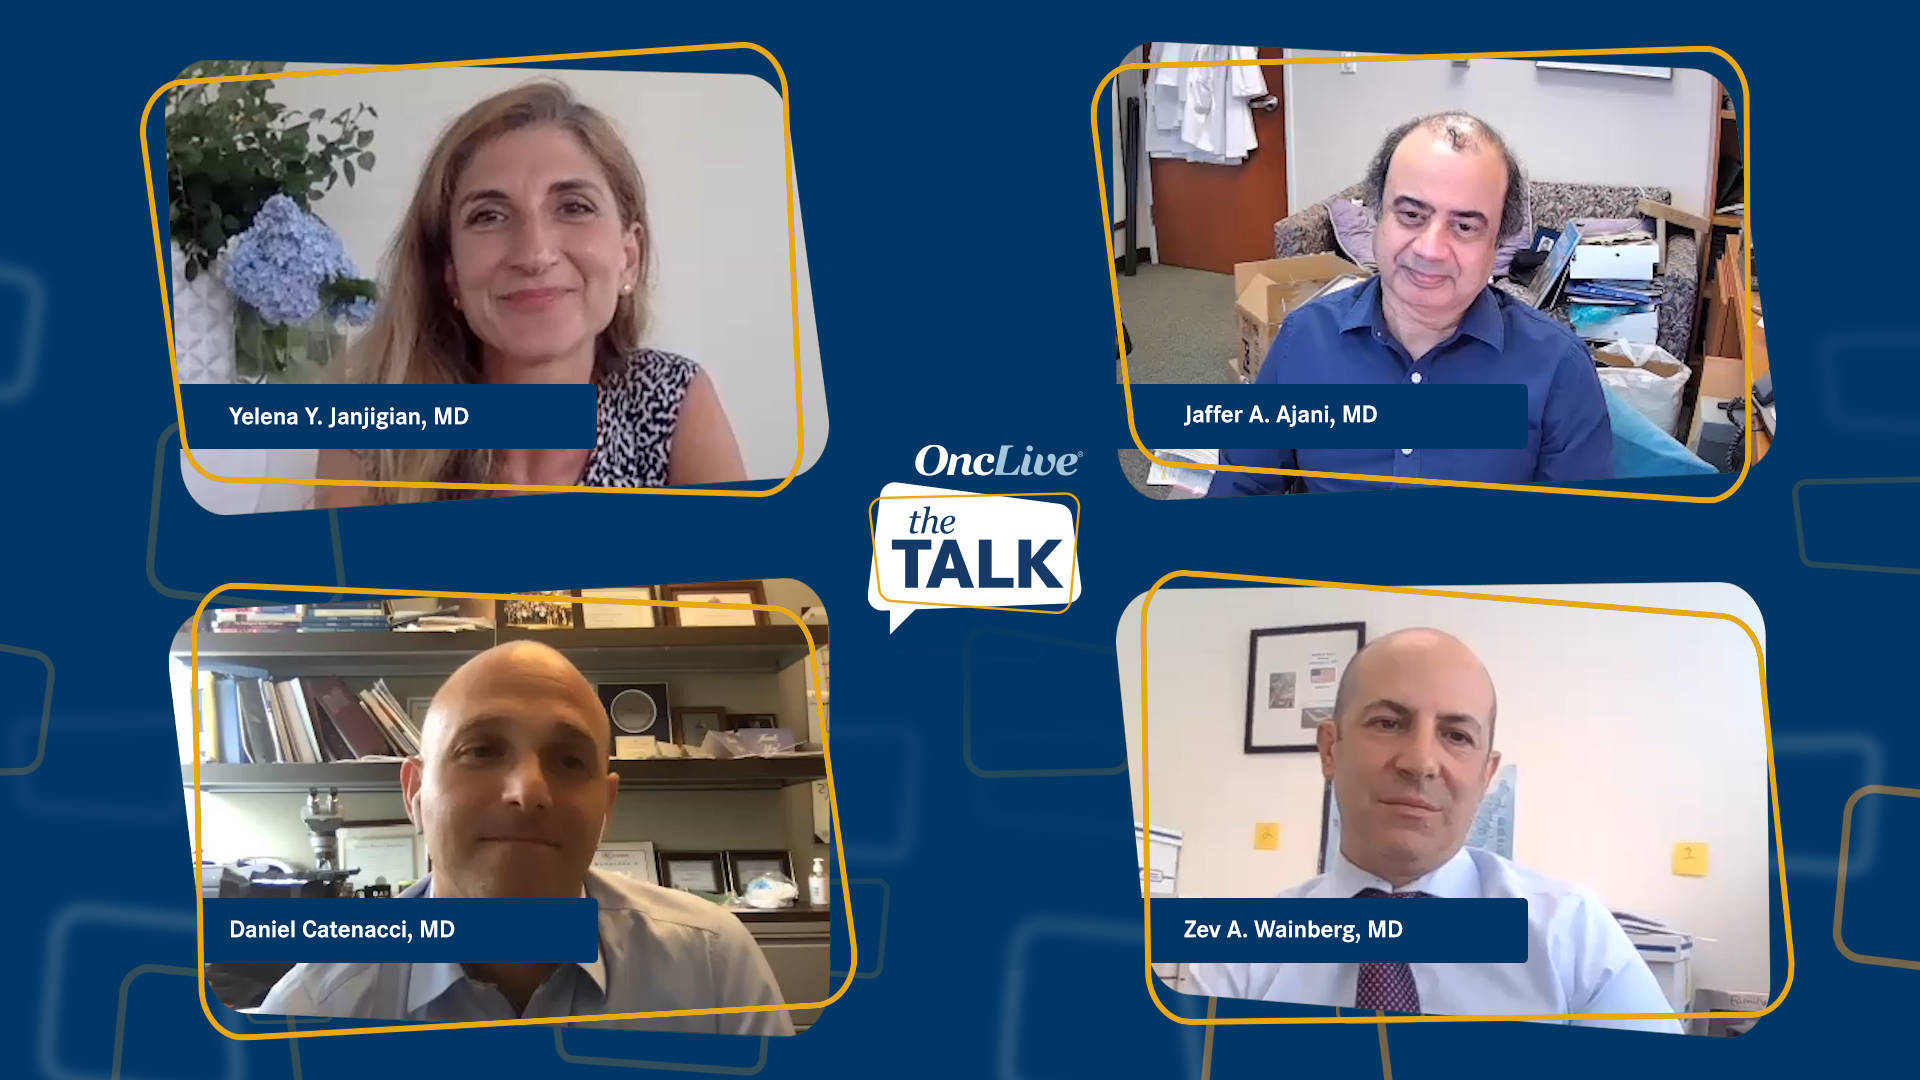 “GI Talk”: A Review of Data from the ASCO 2020 Virtual Meeting